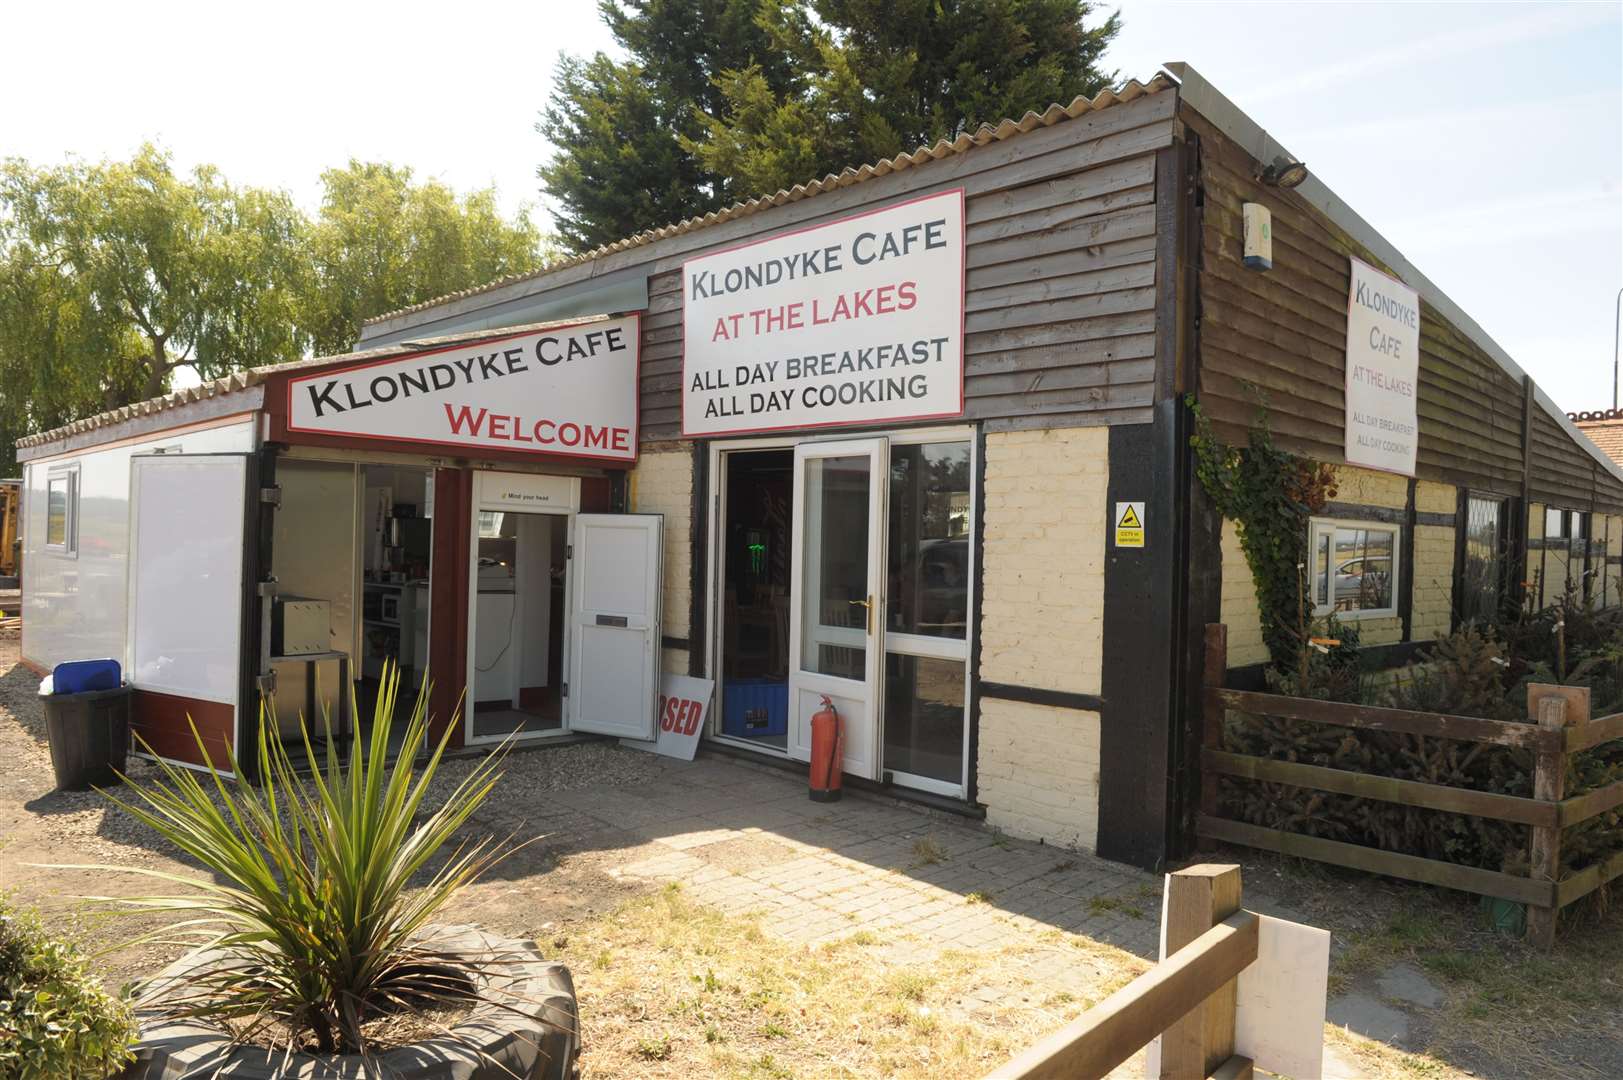 The Klondyke Cafe in Halfway Road, Sheerness